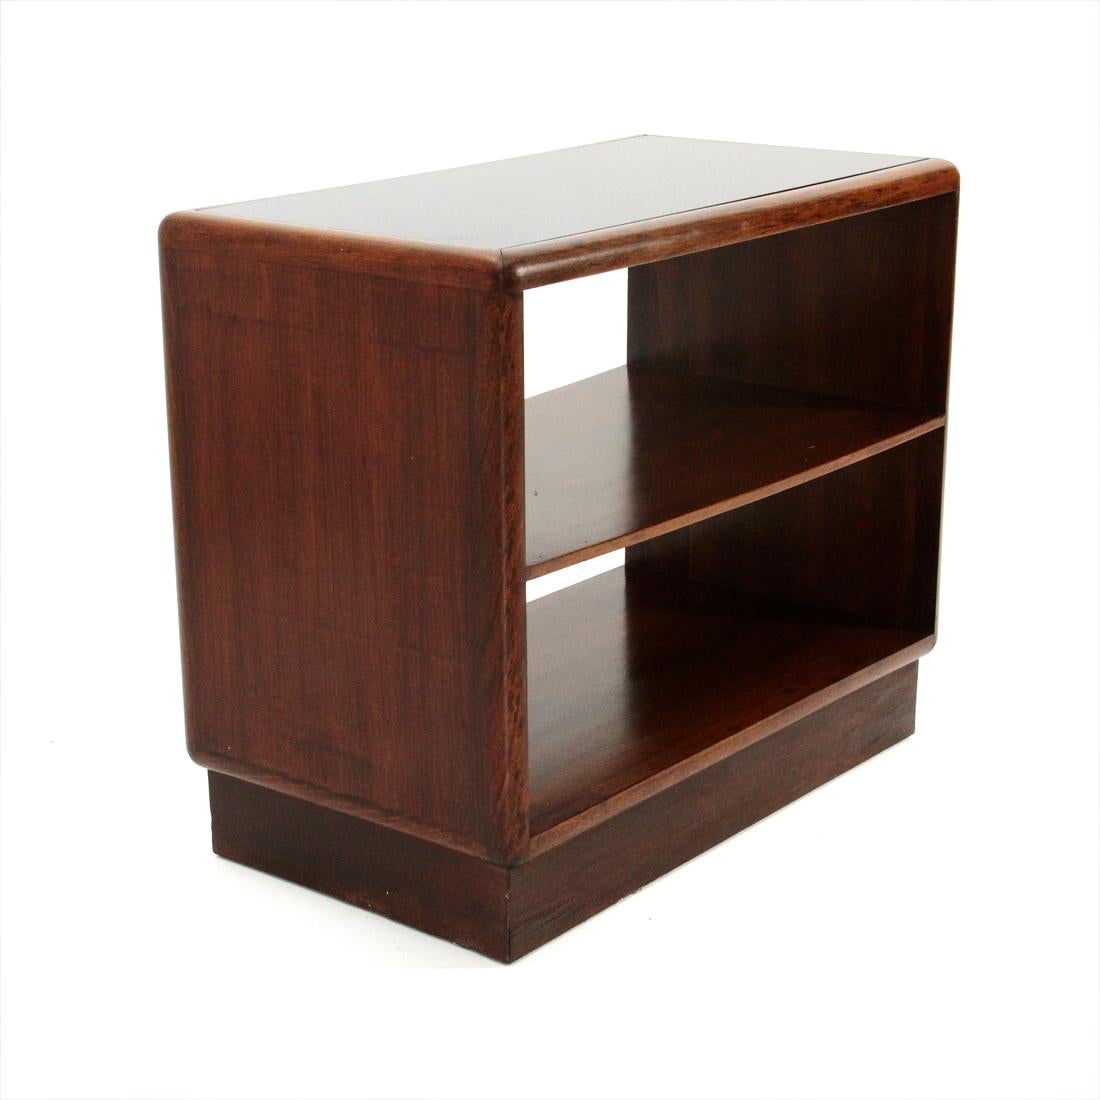 Italian manufacture library produced in the 1950s.
Structure in teak veneered wood with rounded edges and corners.
Veneered wood shelf.
Upper top in black glass.
Good general condition, some signs due to normal use over time, slightly curved